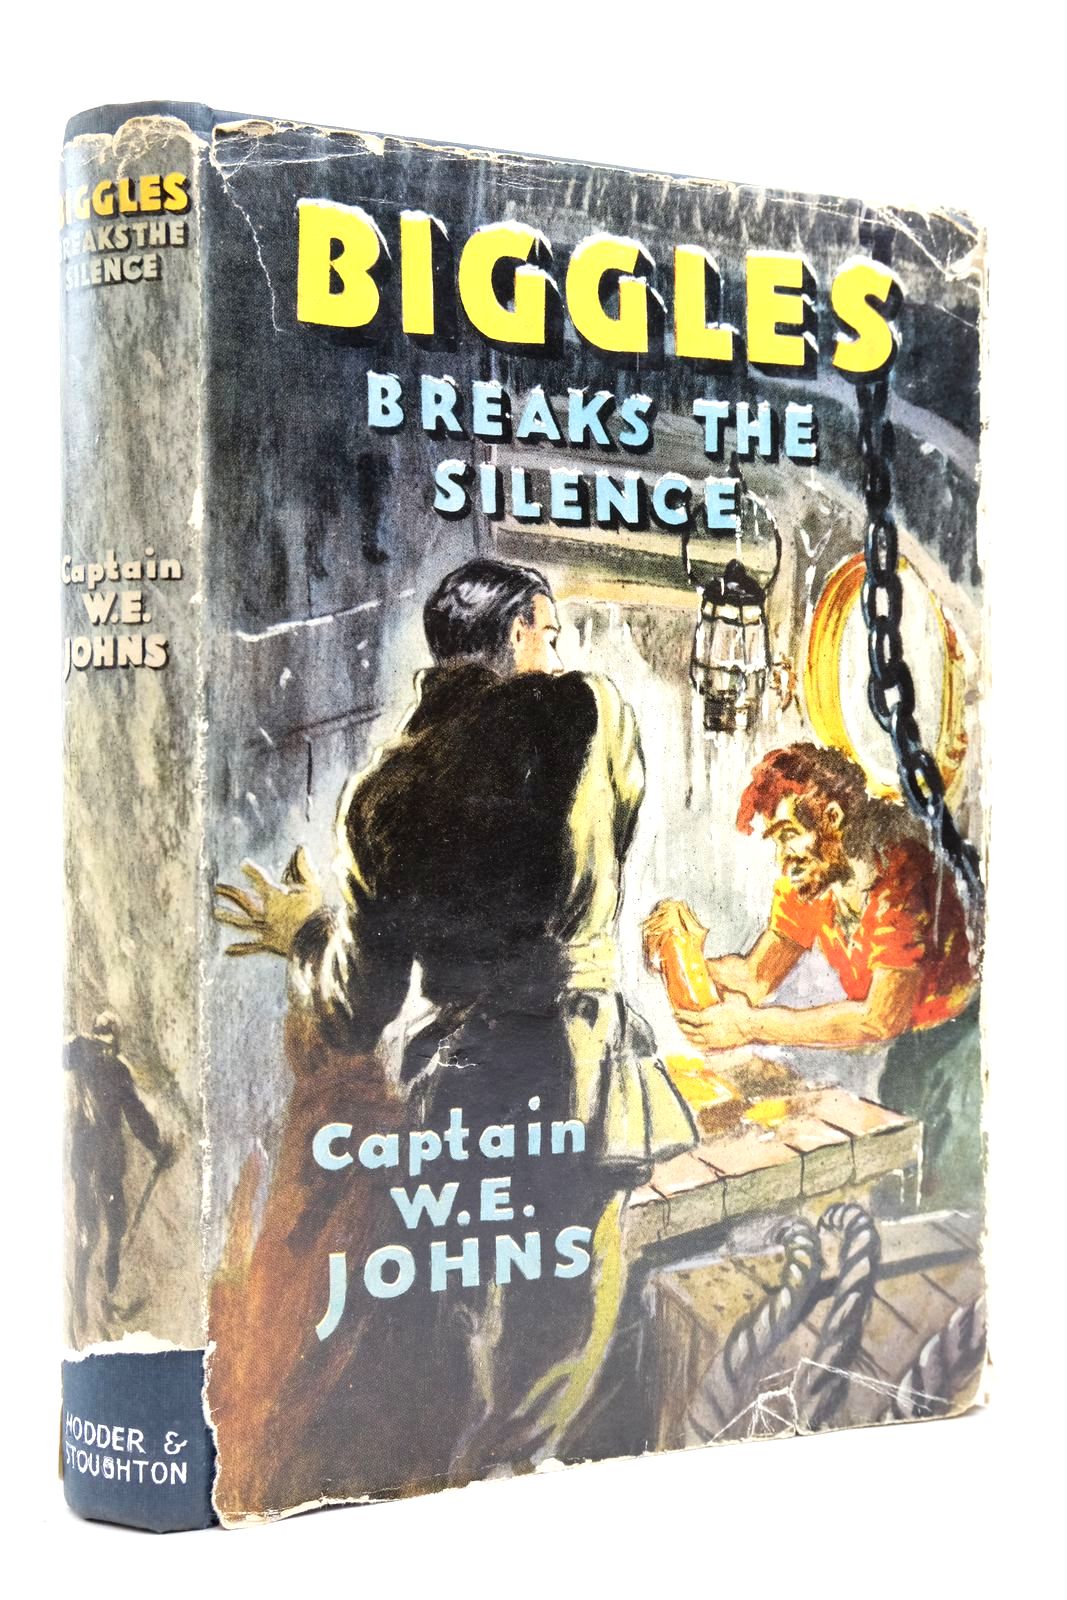 Photo of BIGGLES BREAKS THE SILENCE written by Johns, W.E. illustrated by Stead, Leslie published by Hodder & Stoughton (STOCK CODE: 2139960)  for sale by Stella & Rose's Books